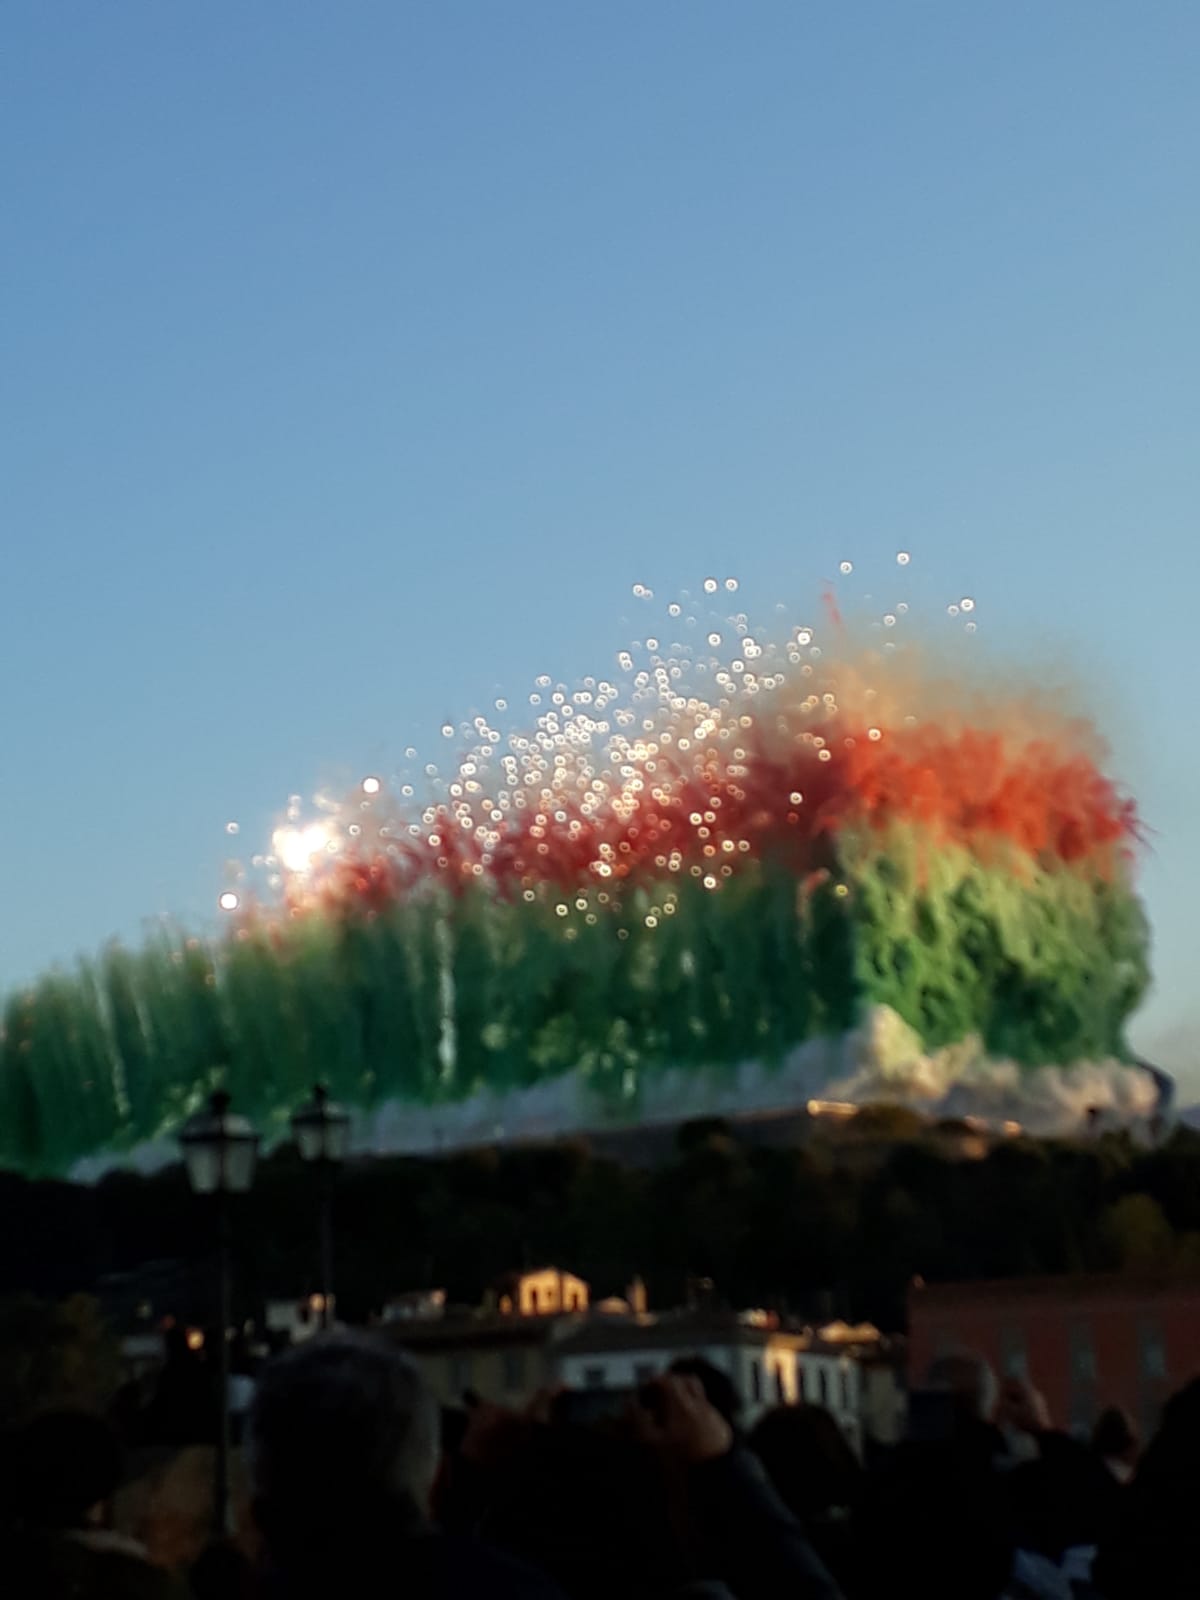 City of Flowers in the Sky. Cai Guo-Qiang creates a daytime explosion event for the city of Florence